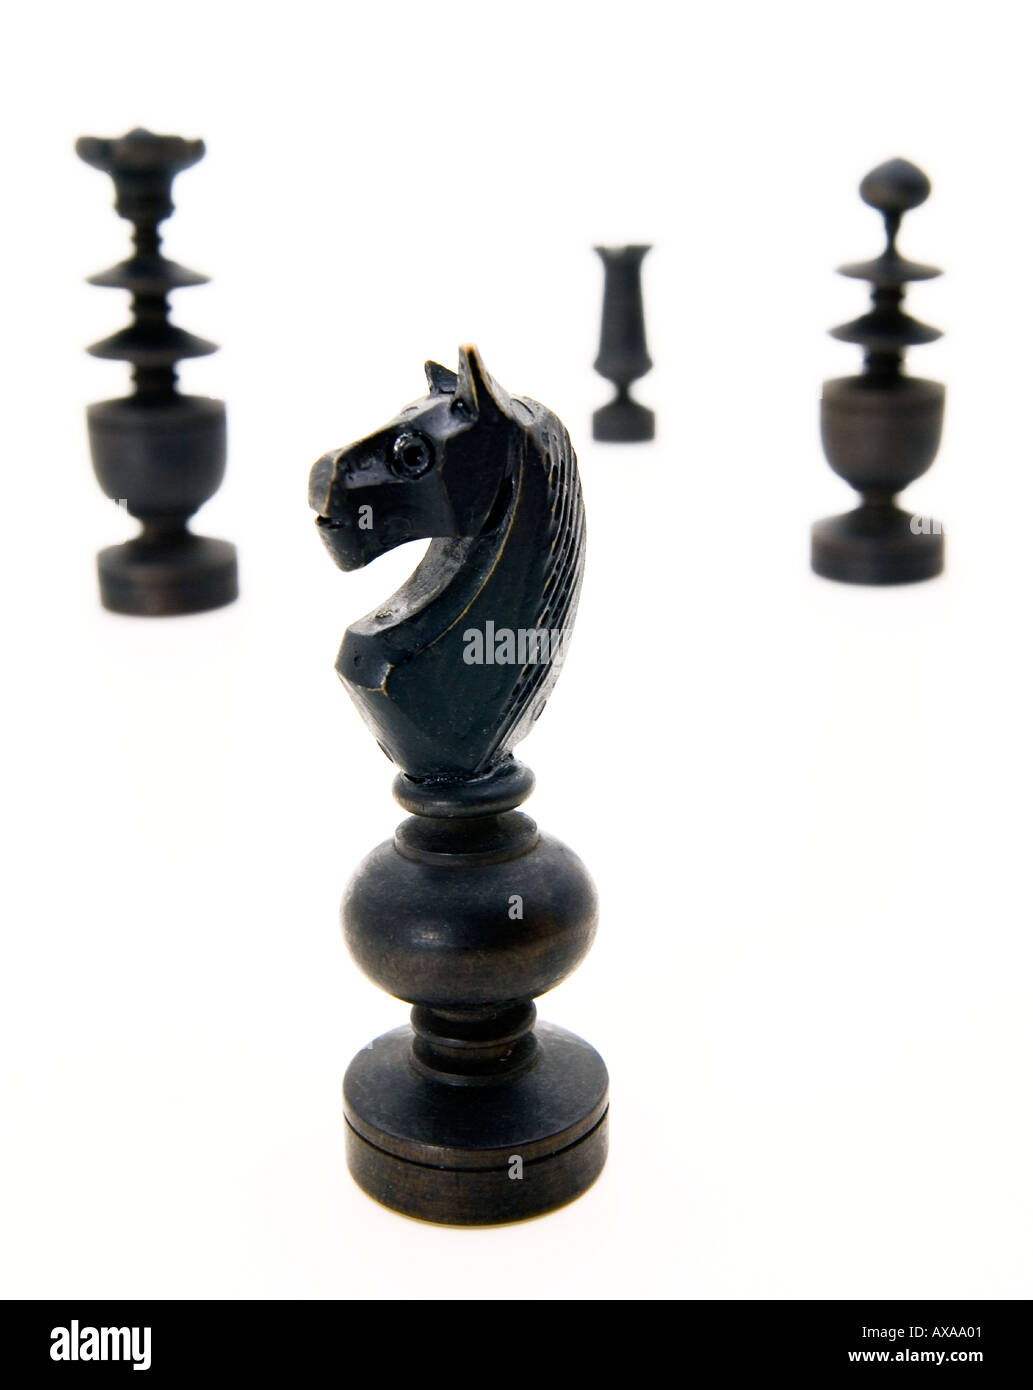 Premium Vector  Two pawns are chess pieces sketch. lies and